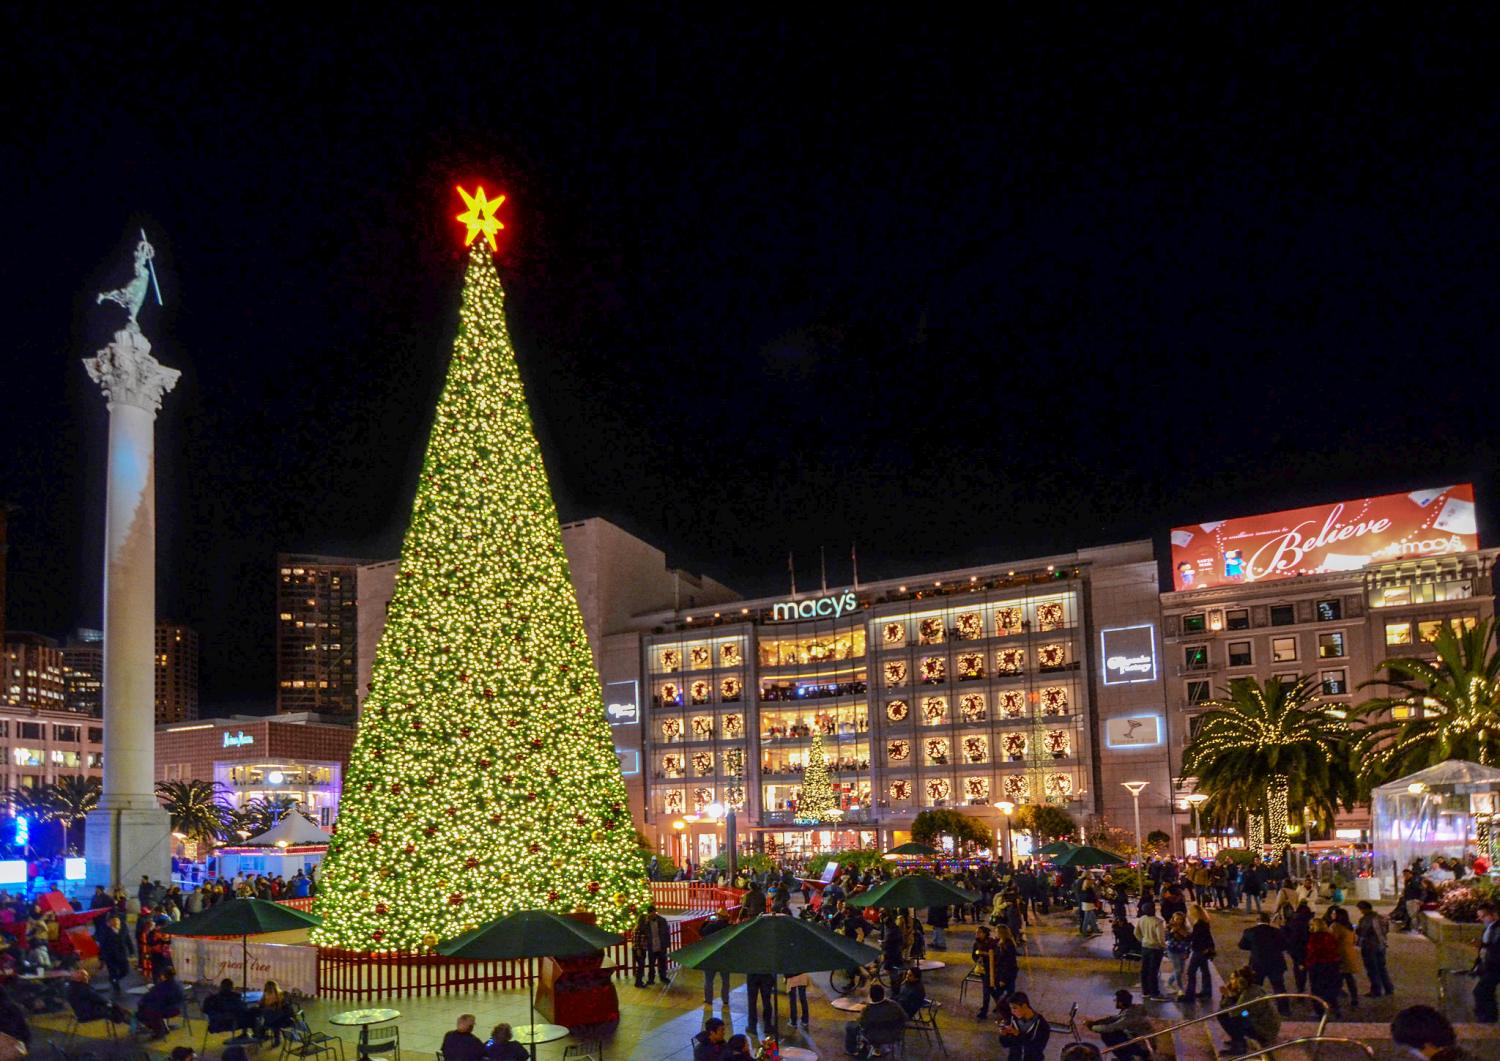 Union Square in San Francisco at Christmas